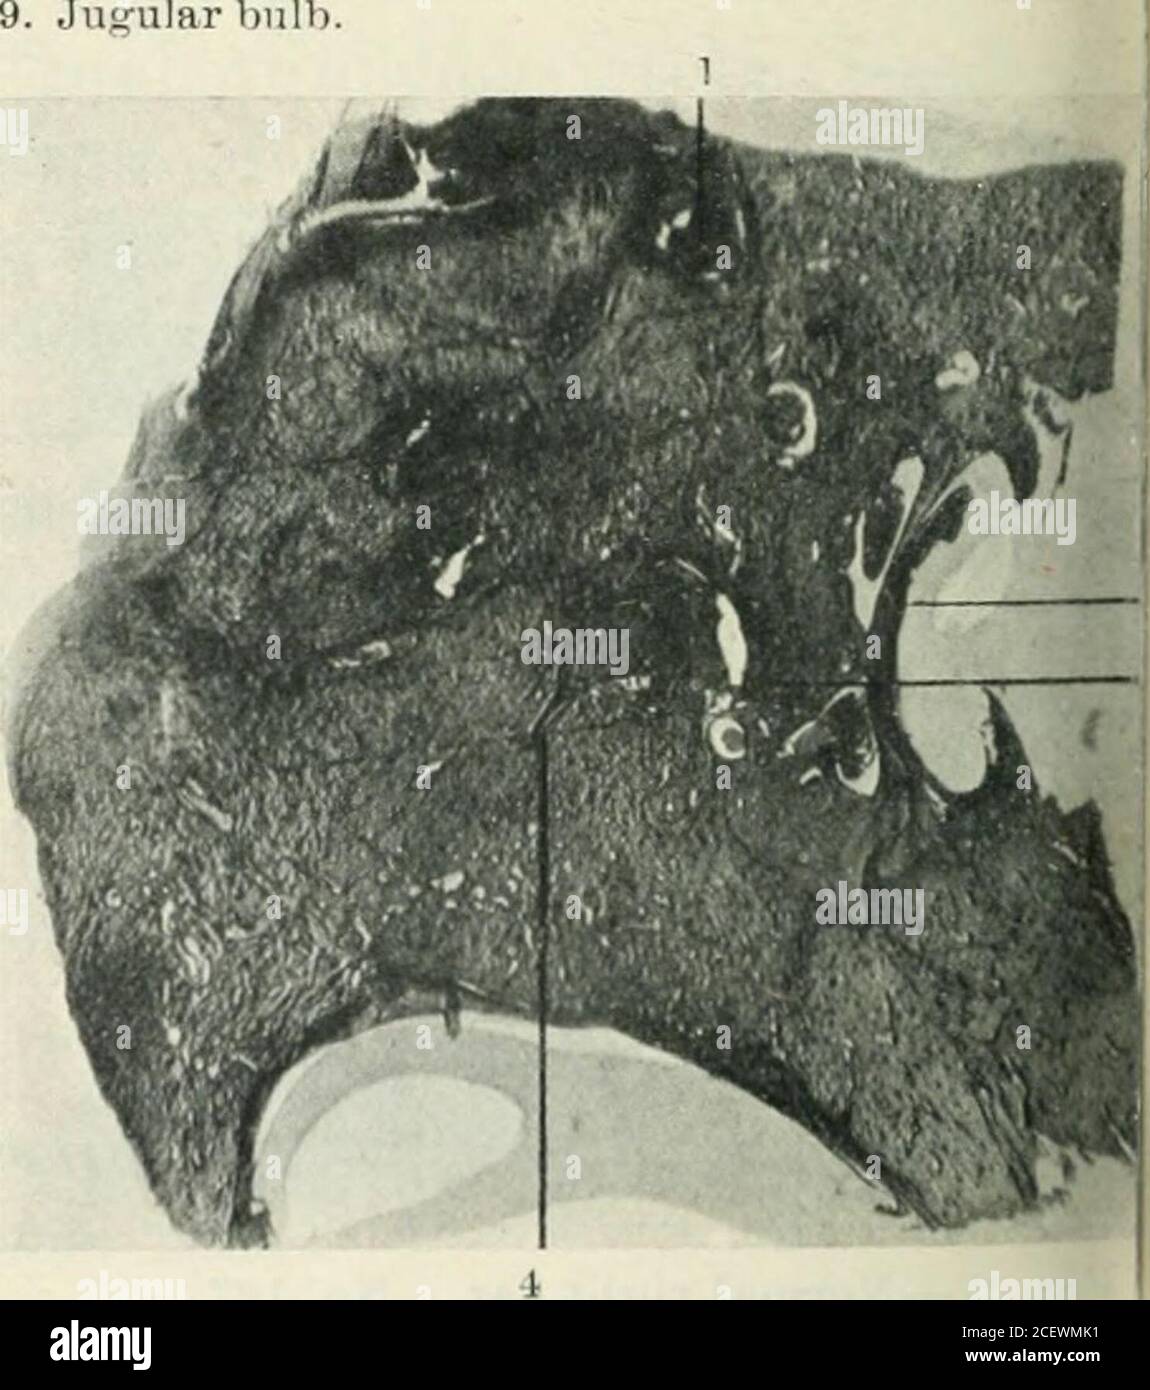 . The Journal of laryngology and otology. Fig. 3a.—Diseased left ear. No. 275. Internal meatus almost obliterated. ! Facial nerve. ! Middle coil of cochlea almost filled vrith new fibretissue. Tensor tympani., Thickened submucous tissue filling tympanum. I, External meatus. i Region of old fistula from tympanum into basal coil! Scala tympani cf basal coil filled with new bone. Jugular bulb.. Fig. 4a.—Diseased left ear. No. 295. 1. Geniculate ganglion in contact with the extradan! abscess. j 2. Tymi)anic membrane adherent to inner wall of tym pnnuin. | i. Fistula into basal coil of cochlea. , i Stock Photo